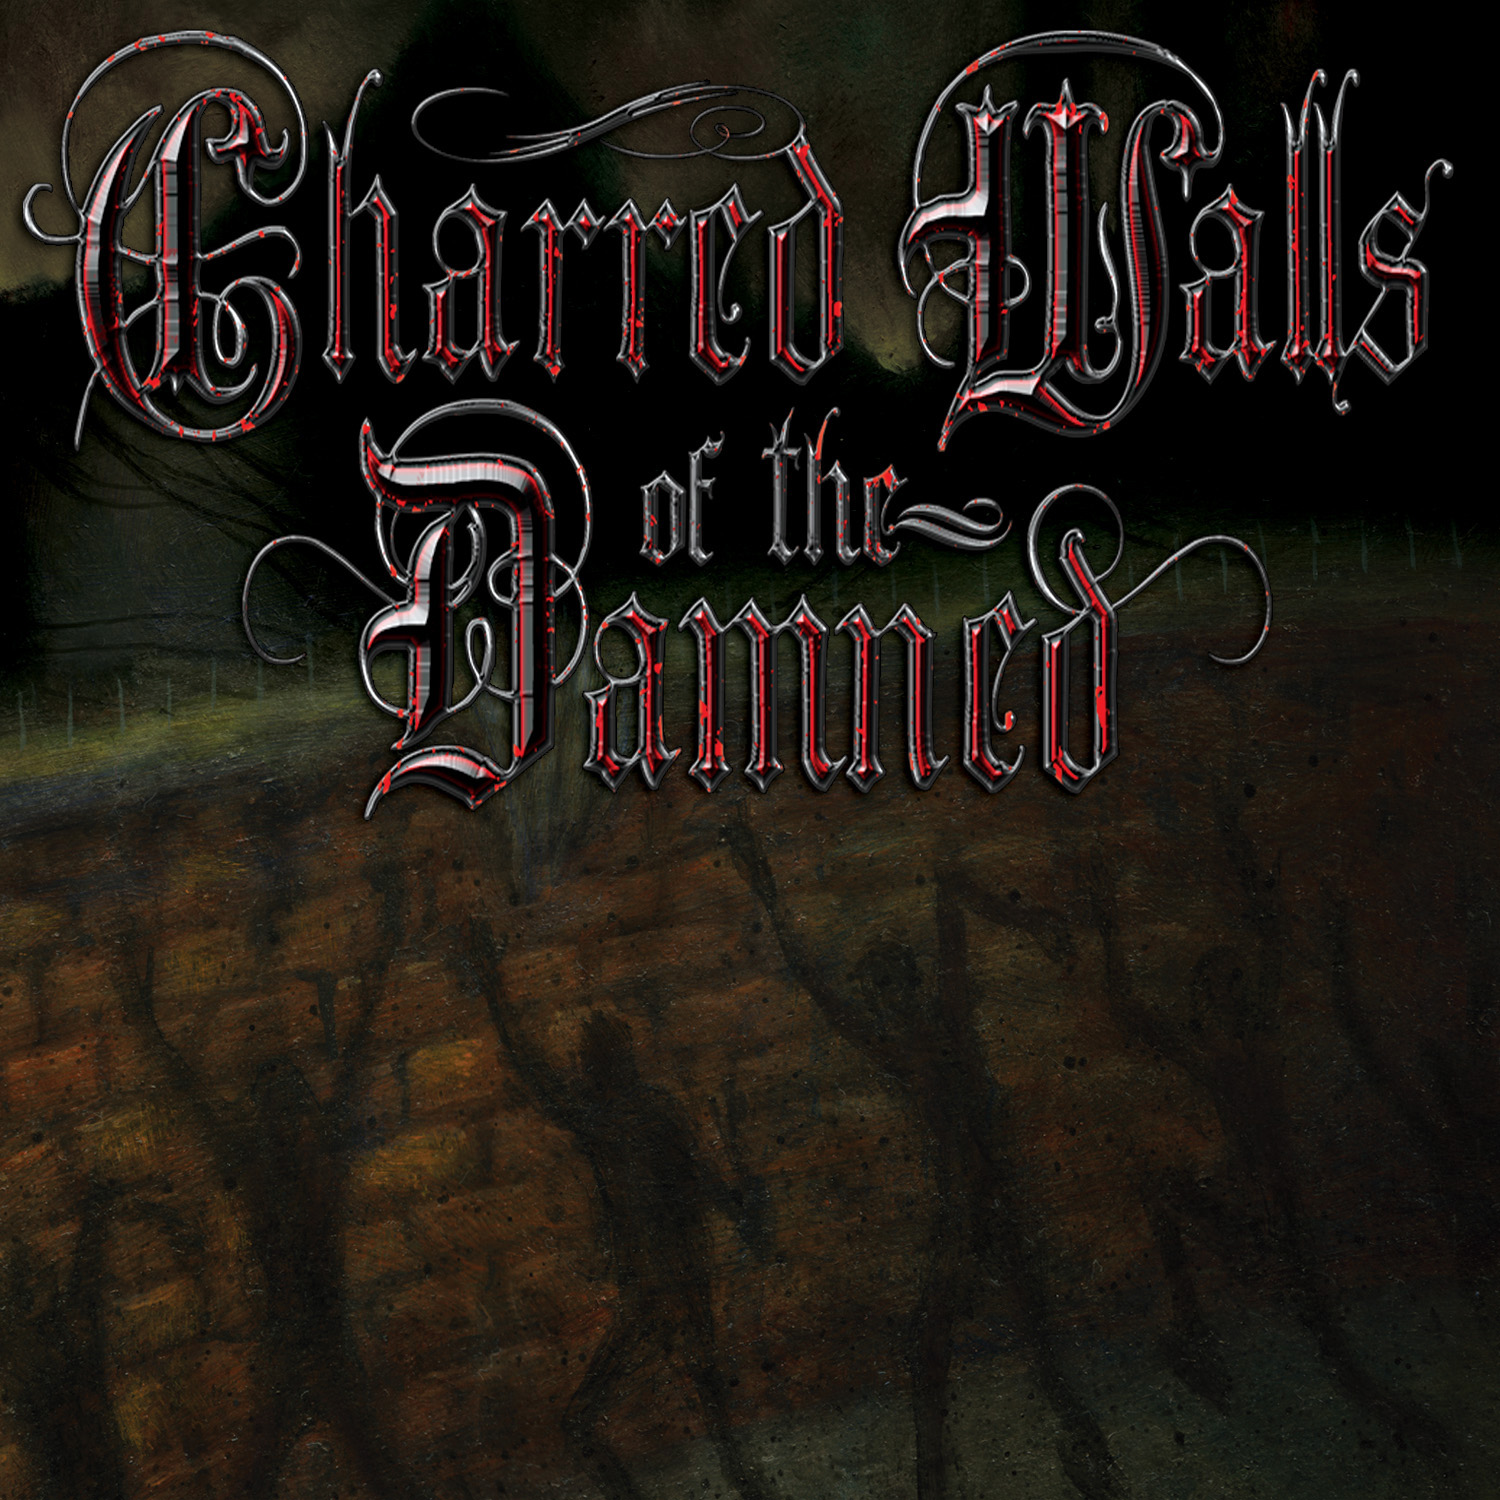 Charred Walls of the Damned – Charred Walls of the Damned Review